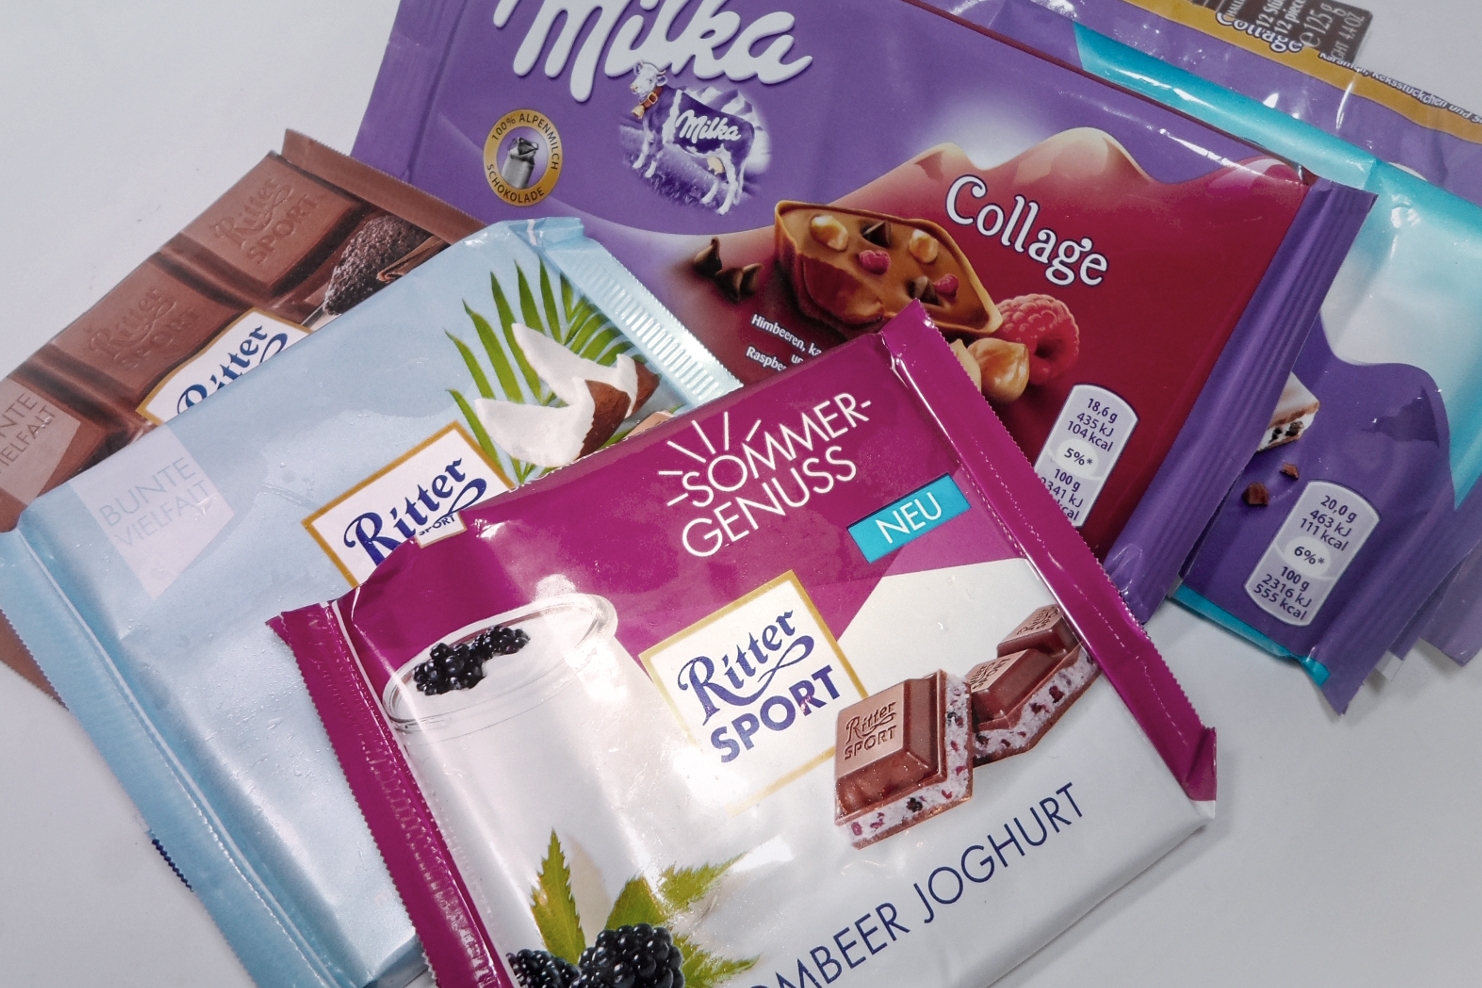 Ritter Sport and Milka chocolate brands